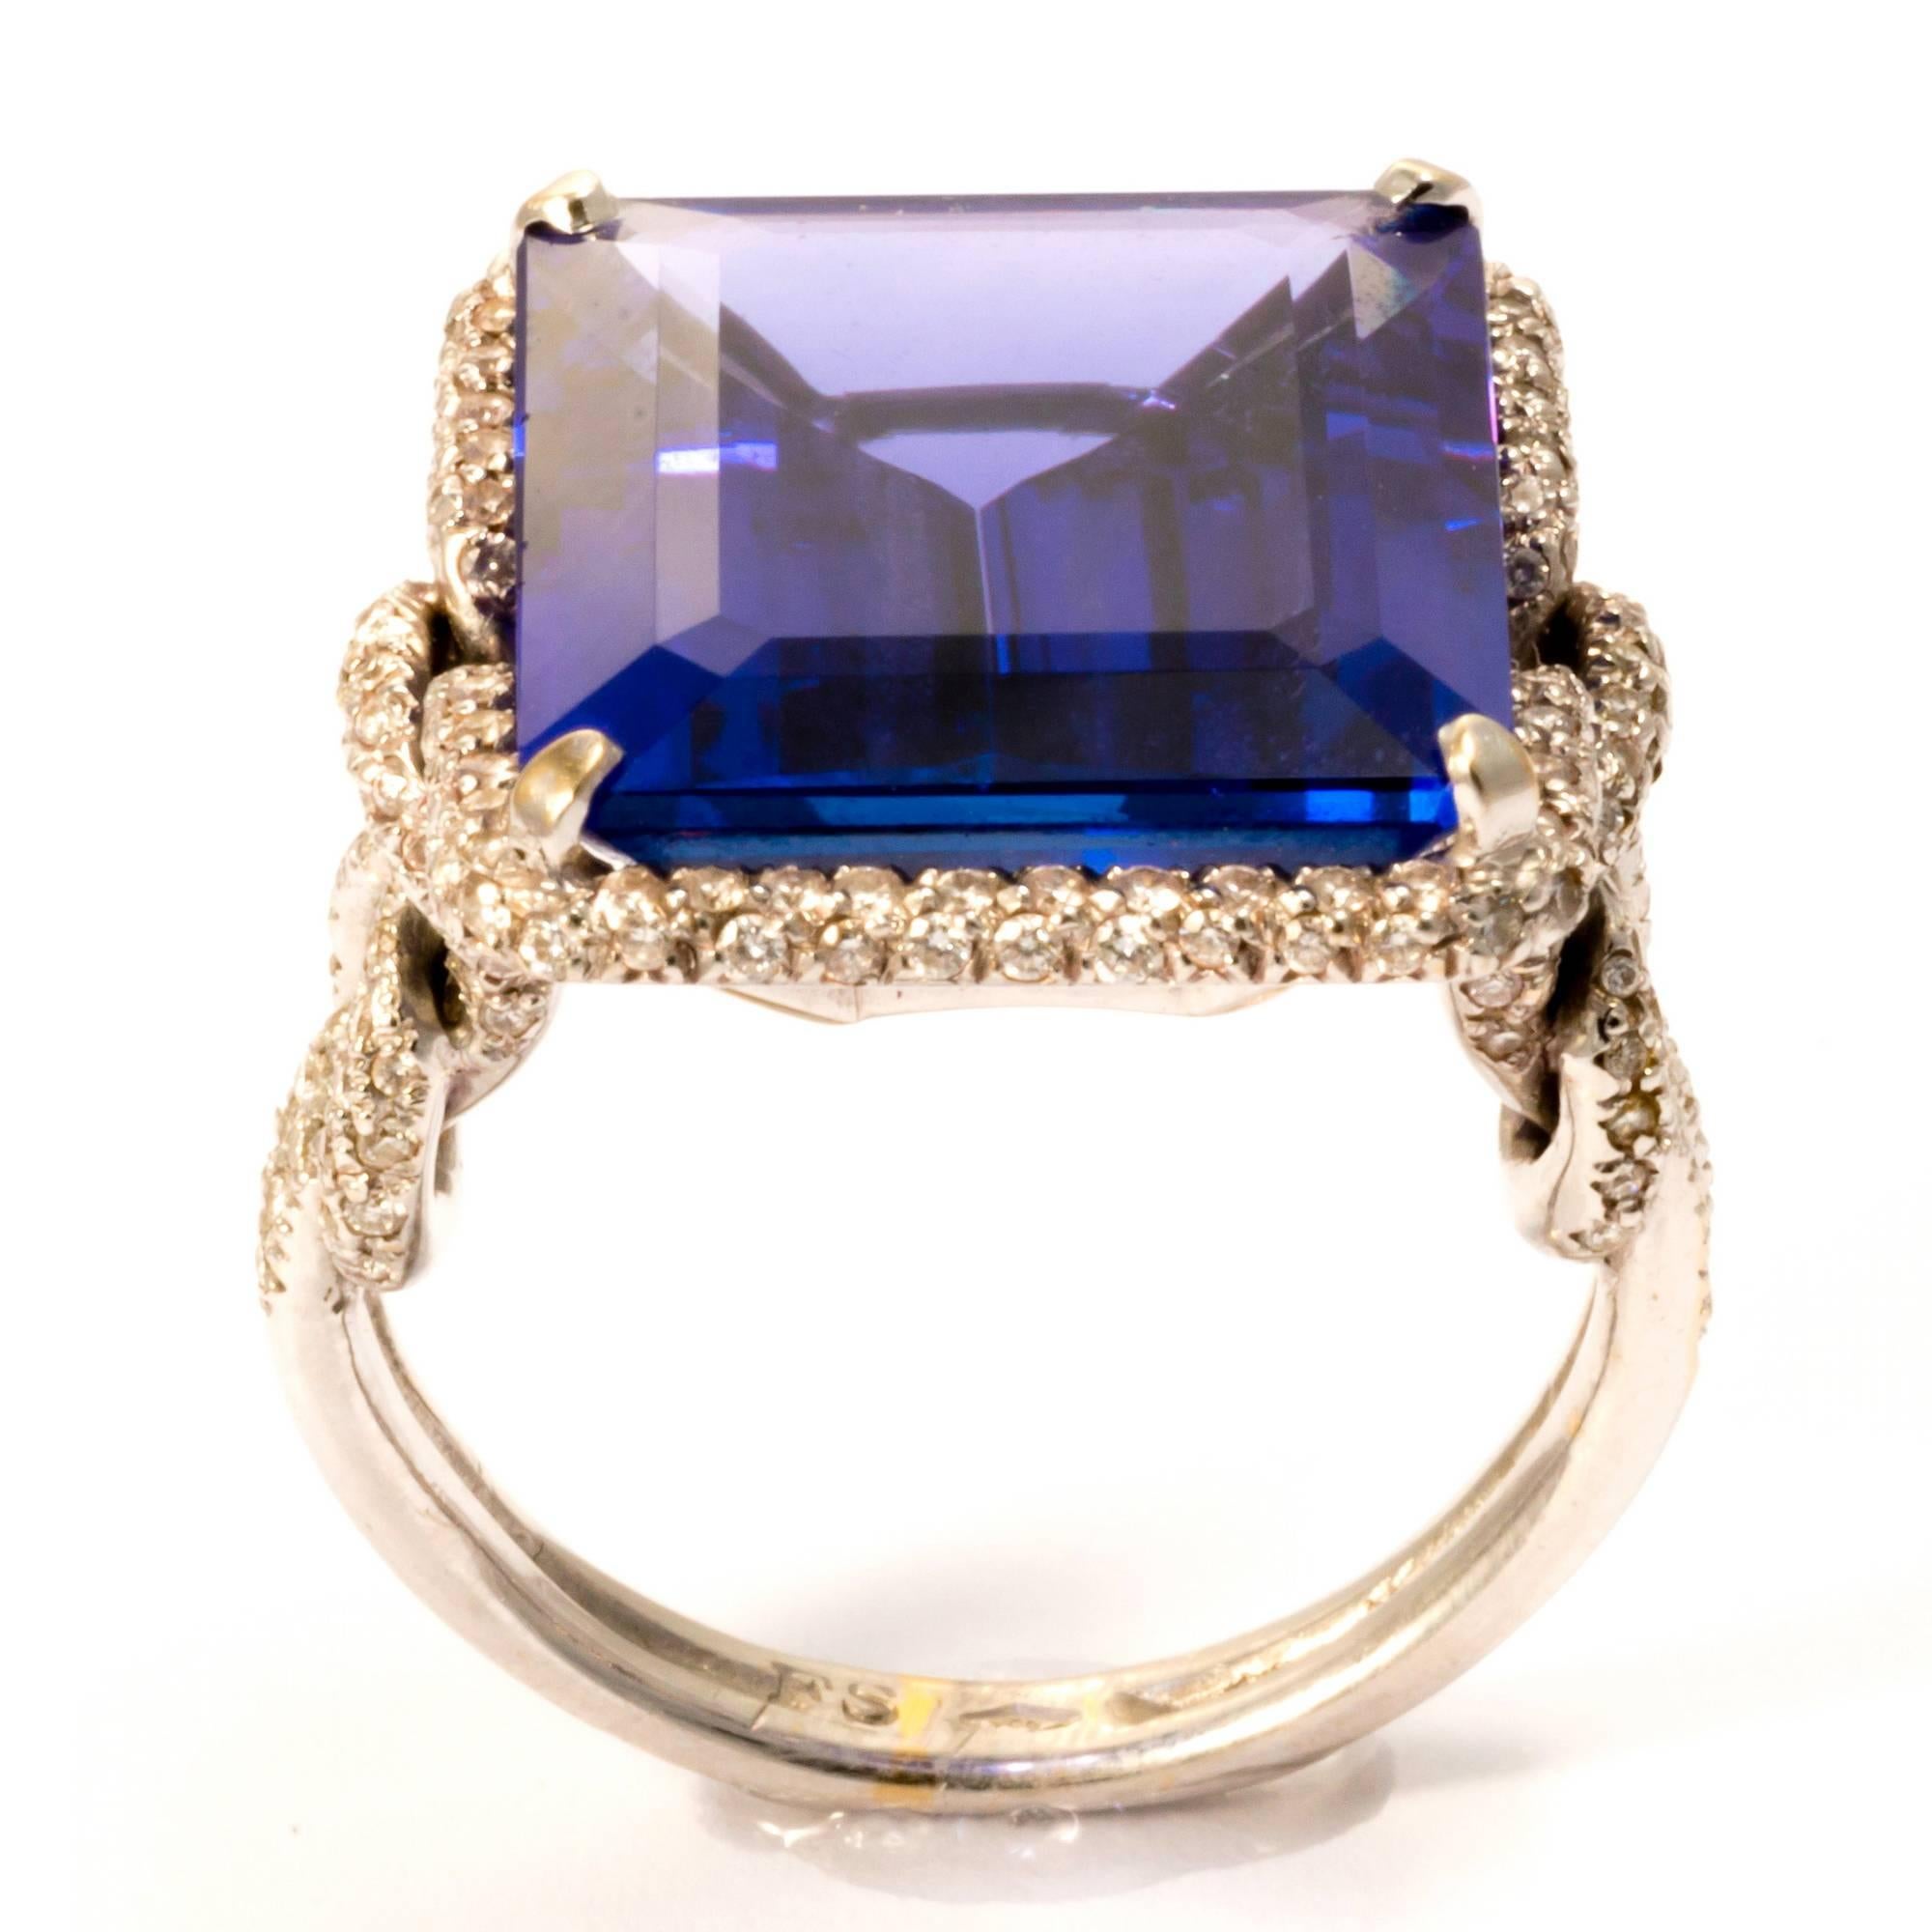 This exquisitely elegant band shows a natural vivid blu tanzanite of excellent saturation and transparency. It's weight is  approximately 17.80 carats. Set in white gold 18 K,  finely decorated by 197 diamonds (1.30 carats approximately).